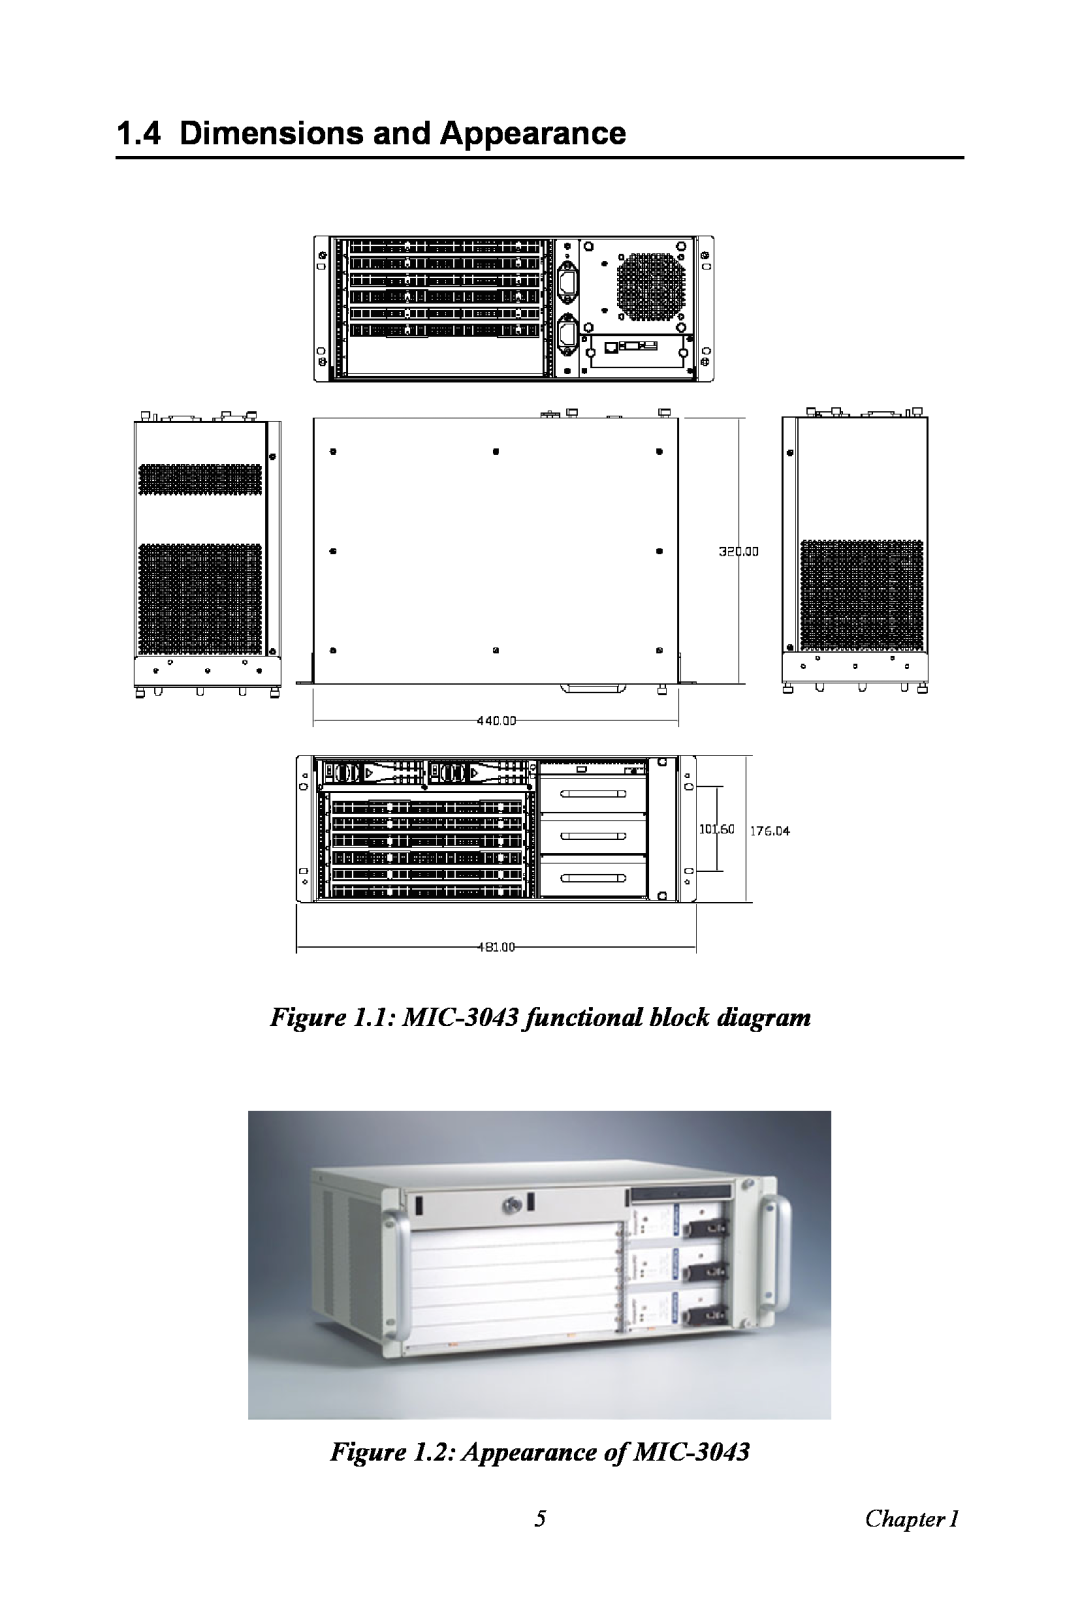 Advantech user manual Dimensions and Appearance, 1 MIC-3043 functional block diagram, 2 Appearance of MIC-3043 